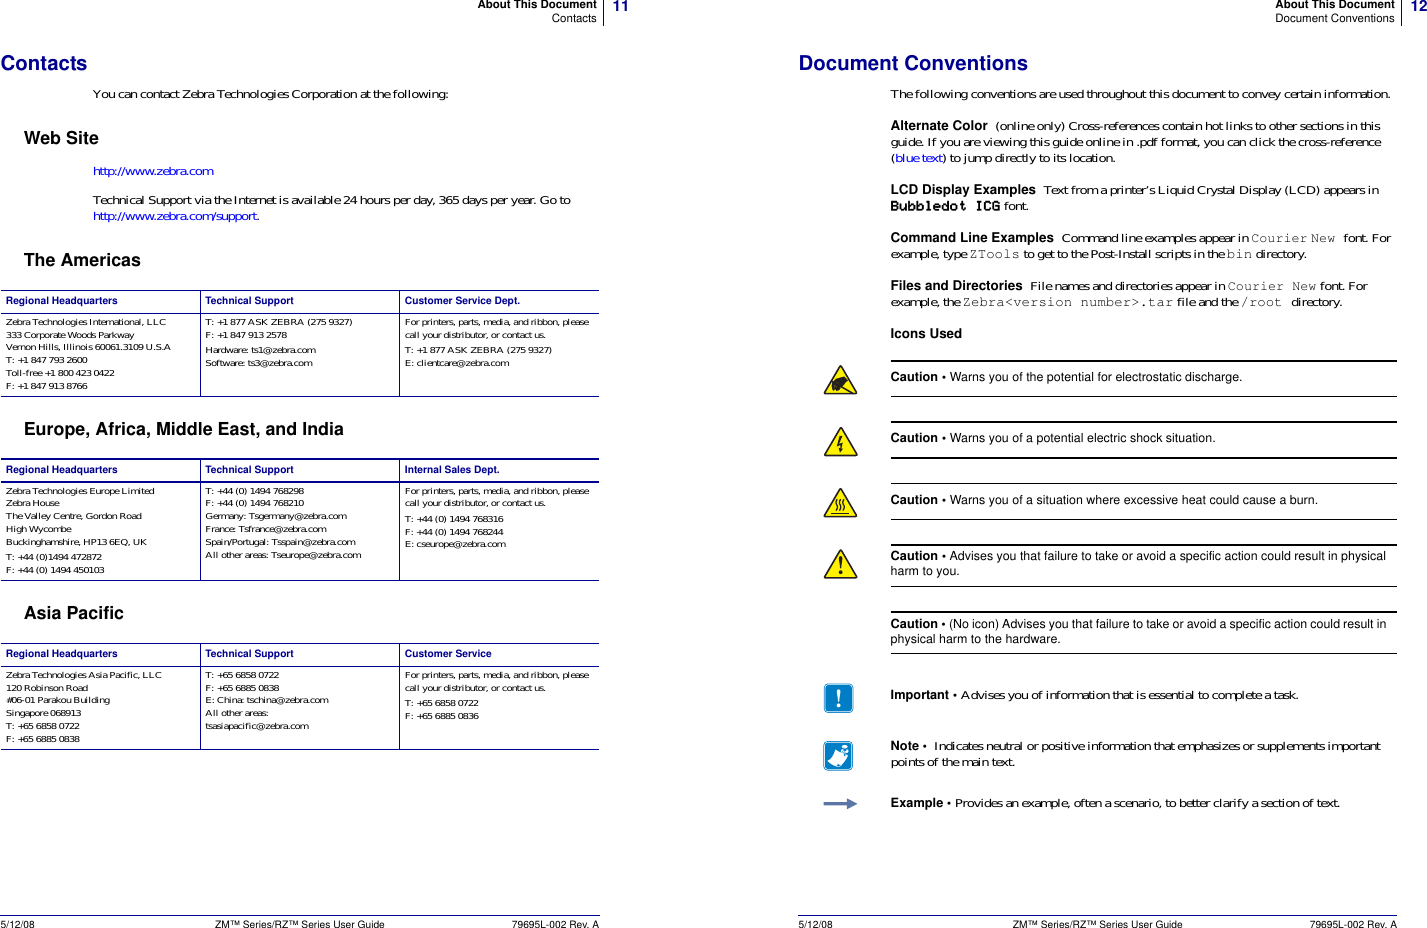 11About This DocumentContacts5/12/08 ZM™ Series/RZ™ Series User Guide 79695L-002 Rev. AContactsYou can contact Zebra Technologies Corporation at the following:Web Sitehttp://www.zebra.comTechnical Support via the Internet is available 24 hours per day, 365 days per year. Go to http://www.zebra.com/support.The AmericasEurope, Africa, Middle East, and IndiaAsia PacificRegional Headquarters Technical Support Customer Service Dept.Zebra Technologies International, LLC333 Corporate Woods ParkwayVernon Hills, Illinois 60061.3109 U.S.AT: +1 847 793 2600Toll-free +1 800 423 0422F: +1 847 913 8766T: +1 877 ASK ZEBRA (275 9327)F: +1 847 913 2578Hardware: ts1@zebra.comSoftware: ts3@zebra.comFor printers, parts, media, and ribbon, please call your distributor, or contact us.T: +1 877 ASK ZEBRA (275 9327)E: clientcare@zebra.comRegional Headquarters Technical Support Internal Sales Dept.Zebra Technologies Europe LimitedZebra HouseThe Valley Centre, Gordon RoadHigh WycombeBuckinghamshire, HP13 6EQ, UKT: +44 (0)1494 472872F: +44 (0) 1494 450103T: +44 (0) 1494 768298F: +44 (0) 1494 768210Germany: Tsgermany@zebra.comFrance: Tsfrance@zebra.comSpain/Portugal: Tsspain@zebra.comAll other areas: Tseurope@zebra.comFor printers, parts, media, and ribbon, please call your distributor, or contact us.T: +44 (0) 1494 768316F: +44 (0) 1494 768244E: cseurope@zebra.comRegional Headquarters Technical Support Customer ServiceZebra Technologies Asia Pacific, LLC120 Robinson Road#06-01 Parakou BuildingSingapore 068913T: +65 6858 0722F: +65 6885 0838T: +65 6858 0722F: +65 6885 0838E: China: tschina@zebra.comAll other areas:tsasiapacific@zebra.comFor printers, parts, media, and ribbon, please call your distributor, or contact us.T: +65 6858 0722F: +65 6885 083612About This DocumentDocument Conventions5/12/08 ZM™ Series/RZ™ Series User Guide 79695L-002 Rev. ADocument ConventionsThe following conventions are used throughout this document to convey certain information.Alternate Color  (online only) Cross-references contain hot links to other sections in this guide. If you are viewing this guide online in .pdf format, you can click the cross-reference (blue text) to jump directly to its location. LCD Display Examples Text from a printer’s Liquid Crystal Display (LCD) appears in Bubbledot ICG font.Command Line Examples  Command line examples appear in Courier New font. For example, type ZTools to get to the Post-Install scripts in the bin directory.Files and Directories  File names and directories appear in Courier New font. For example, the Zebra&lt;version number&gt;.tar file and the /root directory.Icons UsedCaution • Warns you of the potential for electrostatic discharge.Caution • Warns you of a potential electric shock situation.Caution • Warns you of a situation where excessive heat could cause a burn.Caution • Advises you that failure to take or avoid a specific action could result in physical harm to you.Caution • (No icon) Advises you that failure to take or avoid a specific action could result in physical harm to the hardware.Important • Advises you of information that is essential to complete a task.Note •  Indicates neutral or positive information that emphasizes or supplements important points of the main text.Example • Provides an example, often a scenario, to better clarify a section of text.